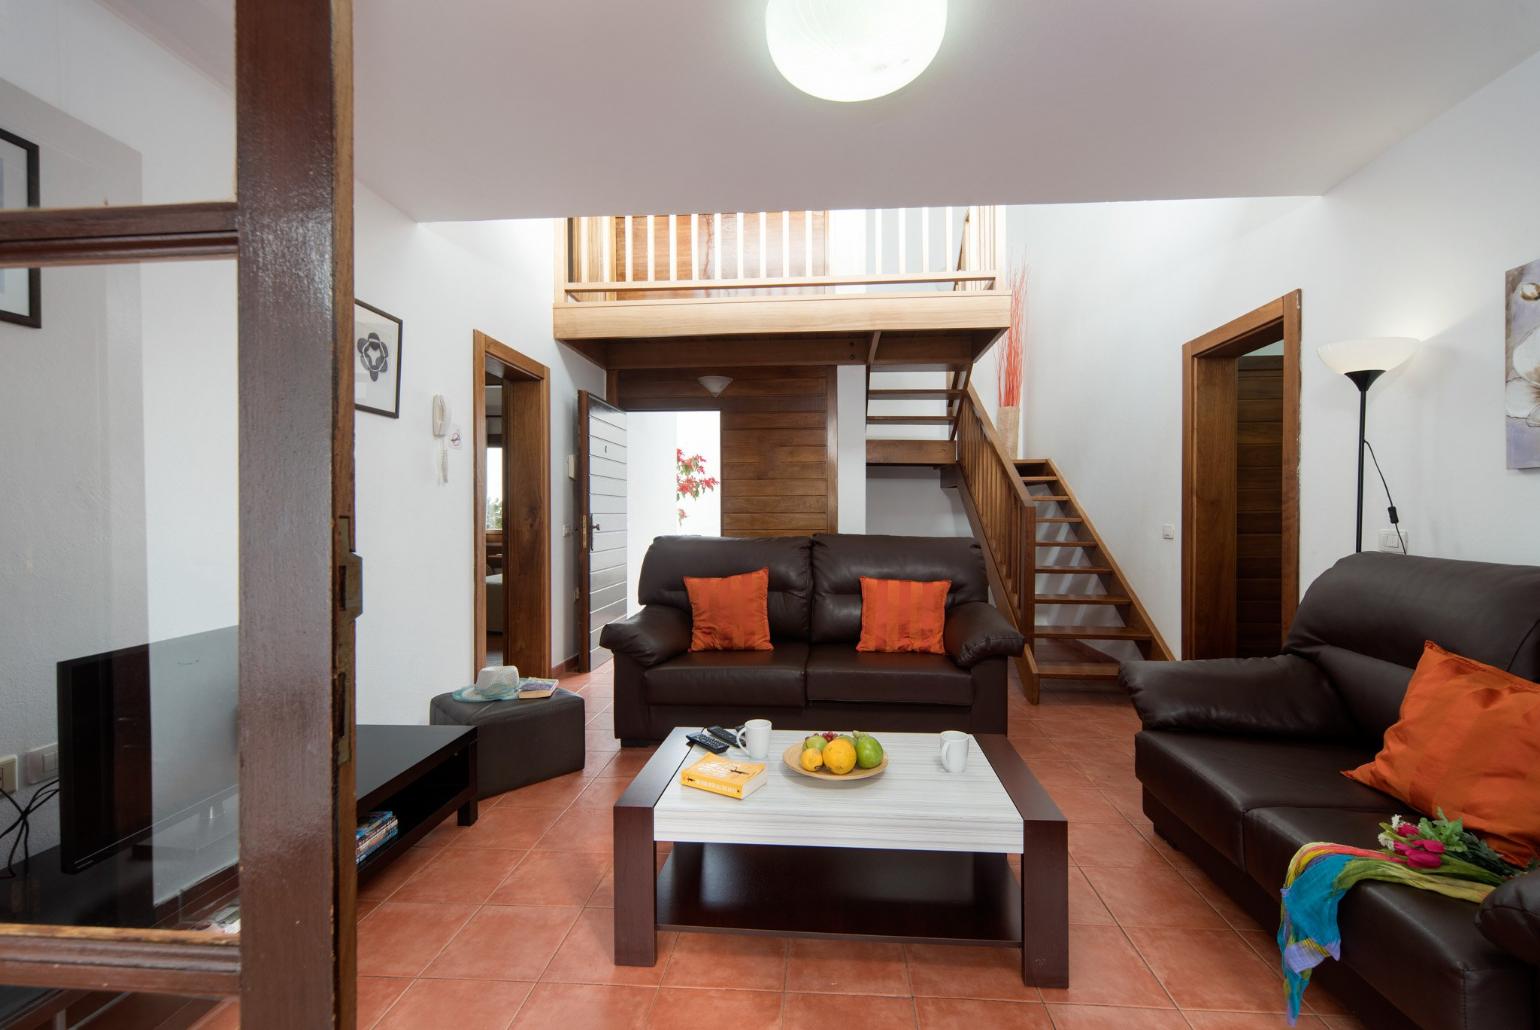 Living room with sofas, WiFi internet, satellite TV, and terrace access